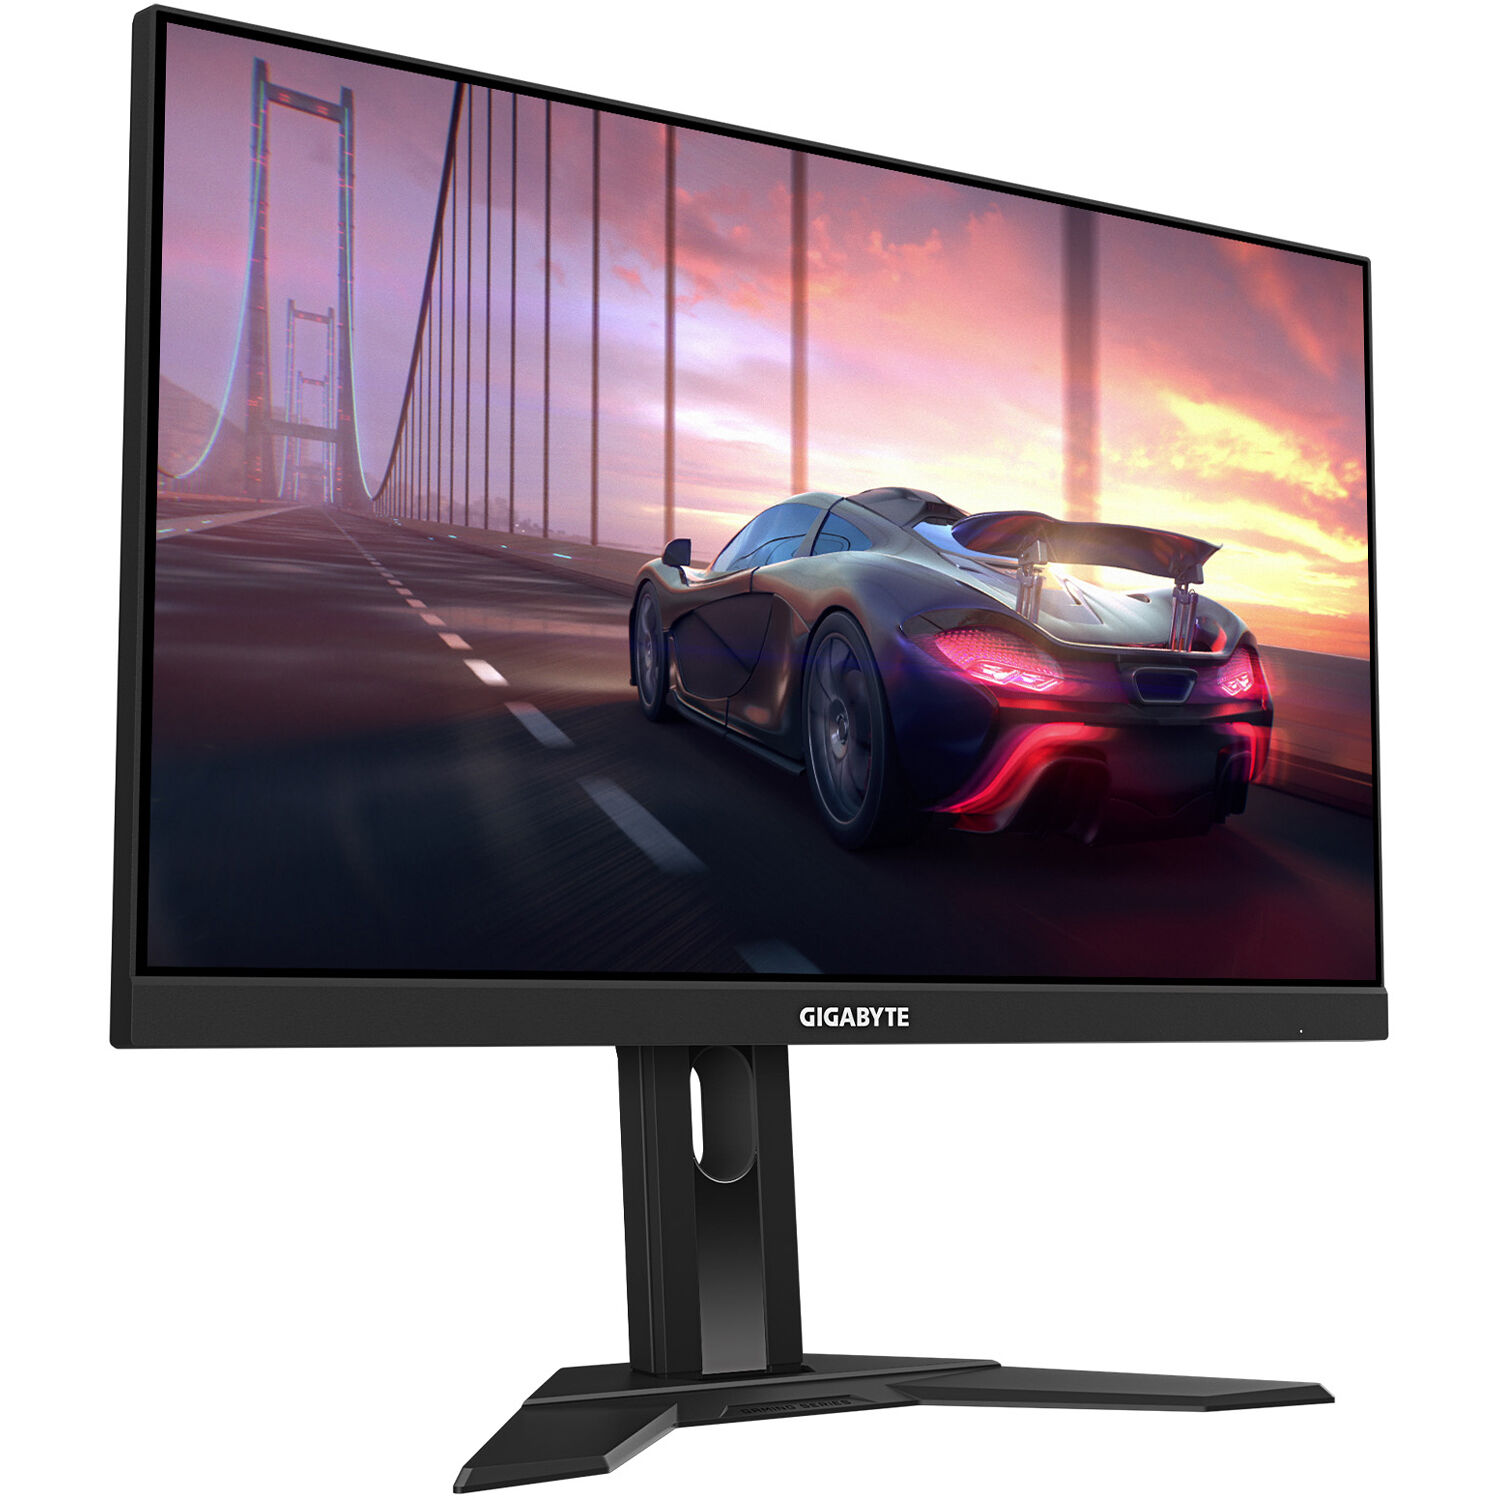 What Should Be The Refresh Rate (Hz) For A Gaming Monitor?